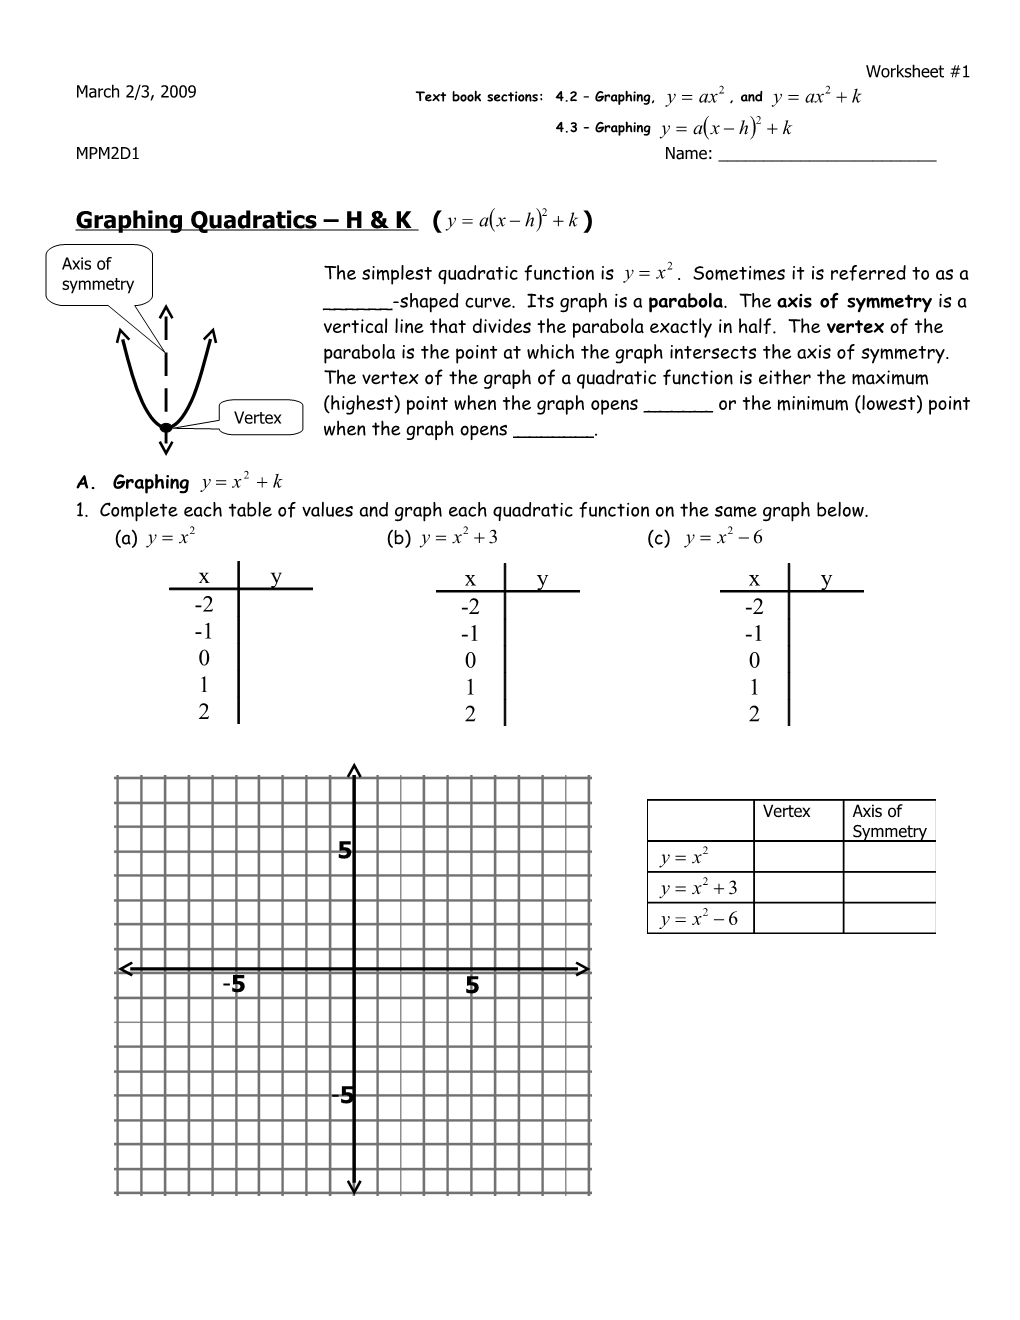 1. Complete Each Table of Values and Graph Each Quadratic Function on the Same Graph Below